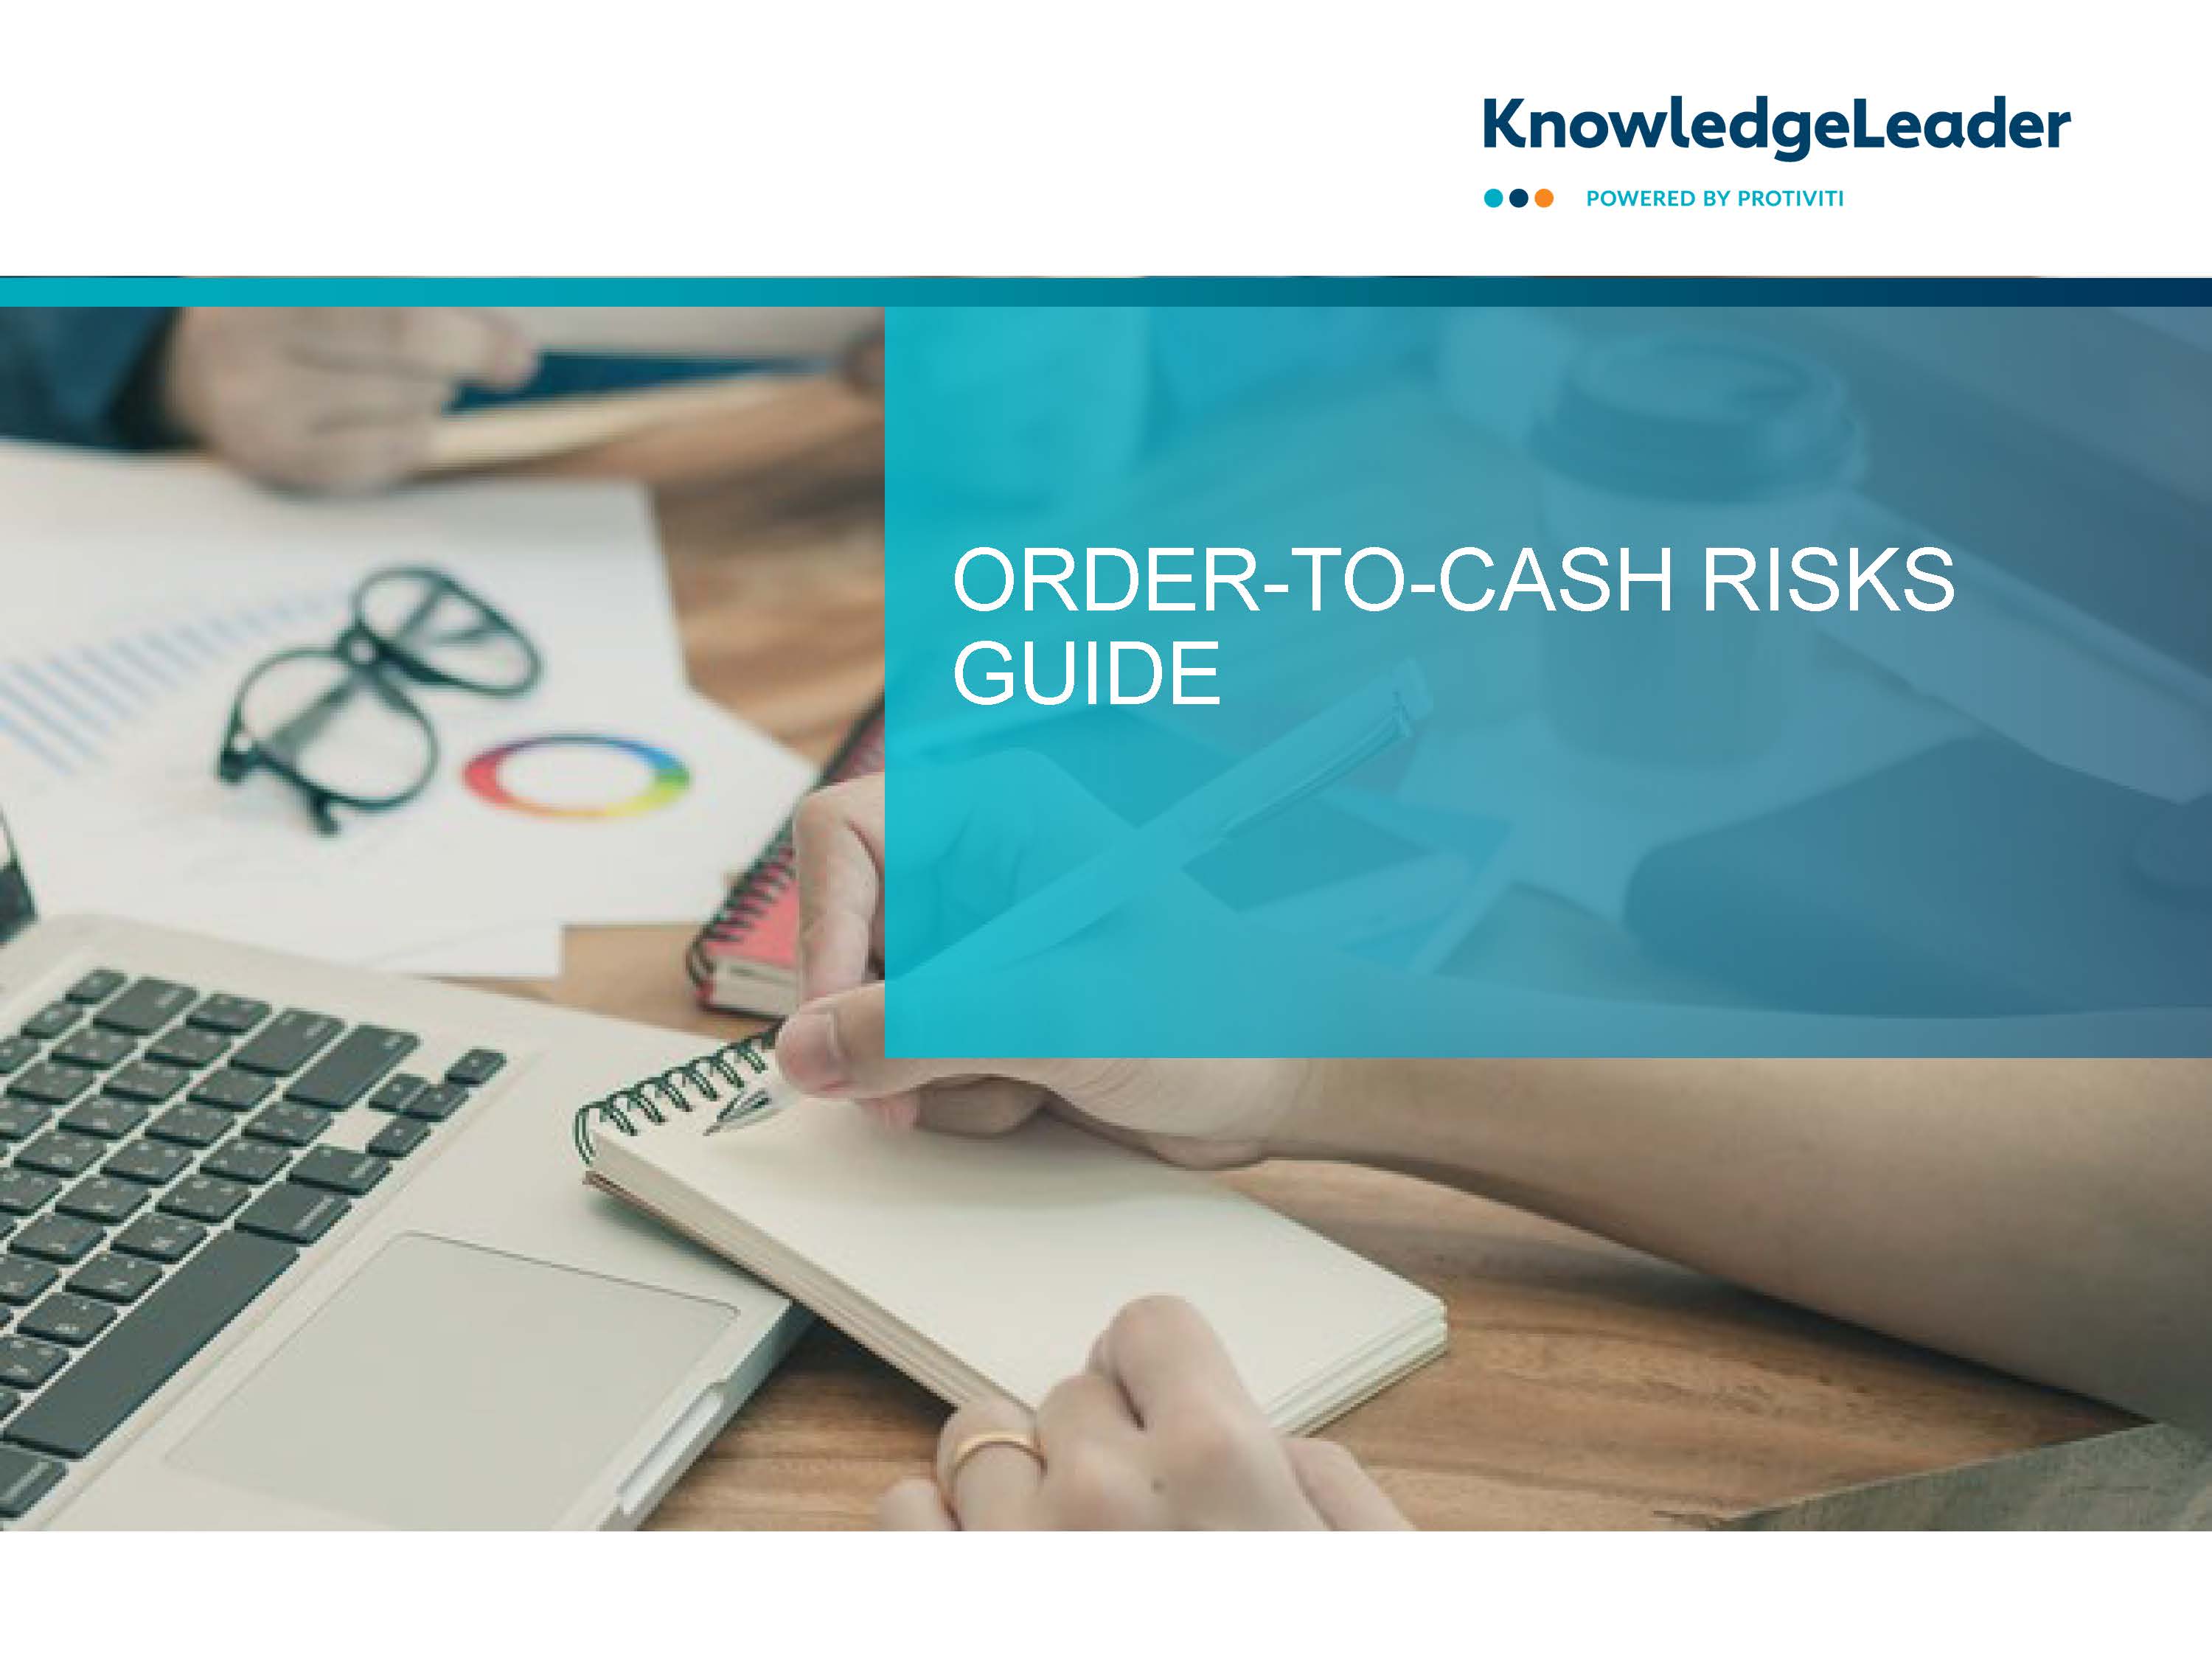 Screenshot of the first page of Order-to-Cash Risks Guide